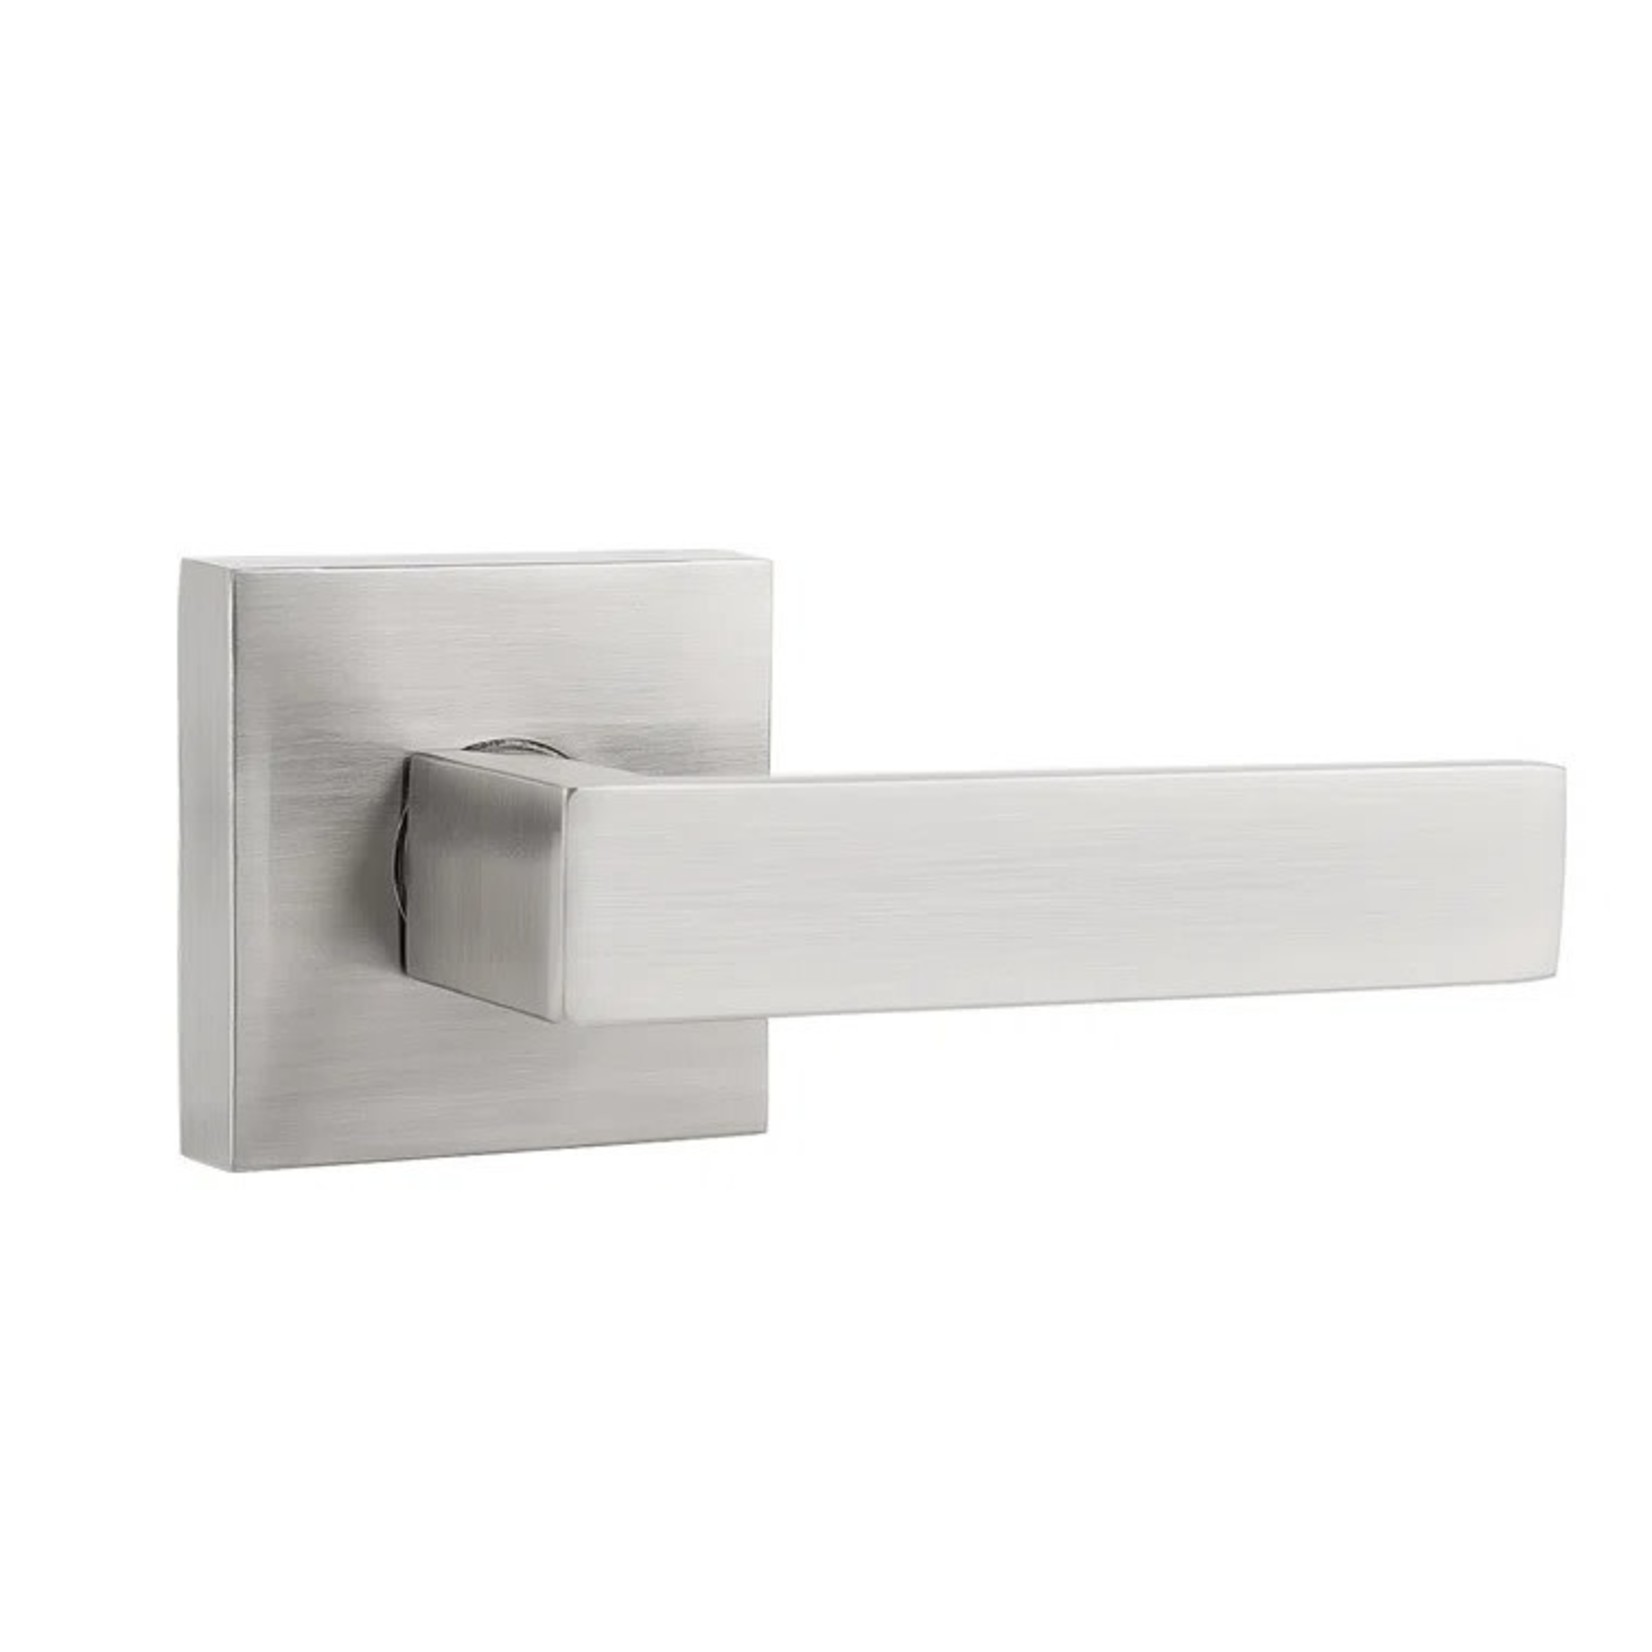 *Passage Door Lever w Square Rosette Heavy Duty Solid Lever - Brushed Nickel